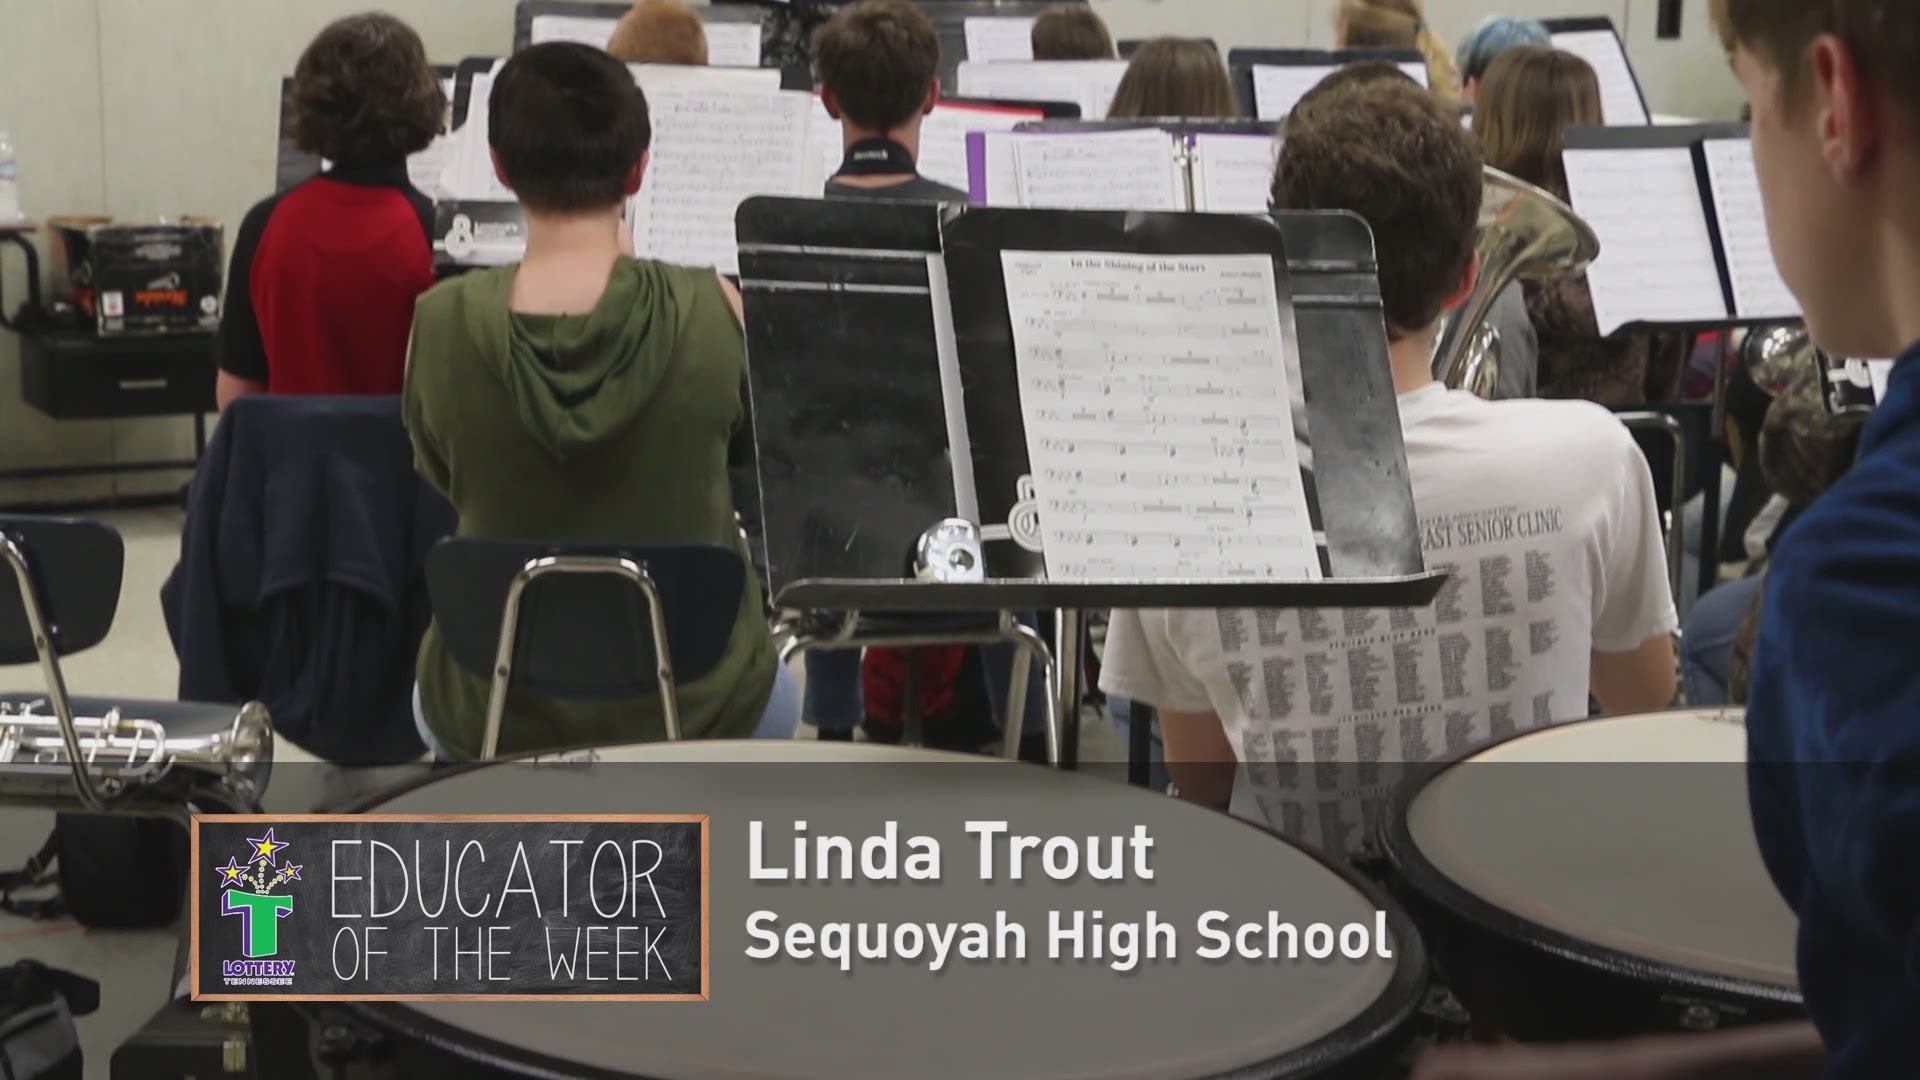 The Educator of the Week 4/16 is Linda Trout